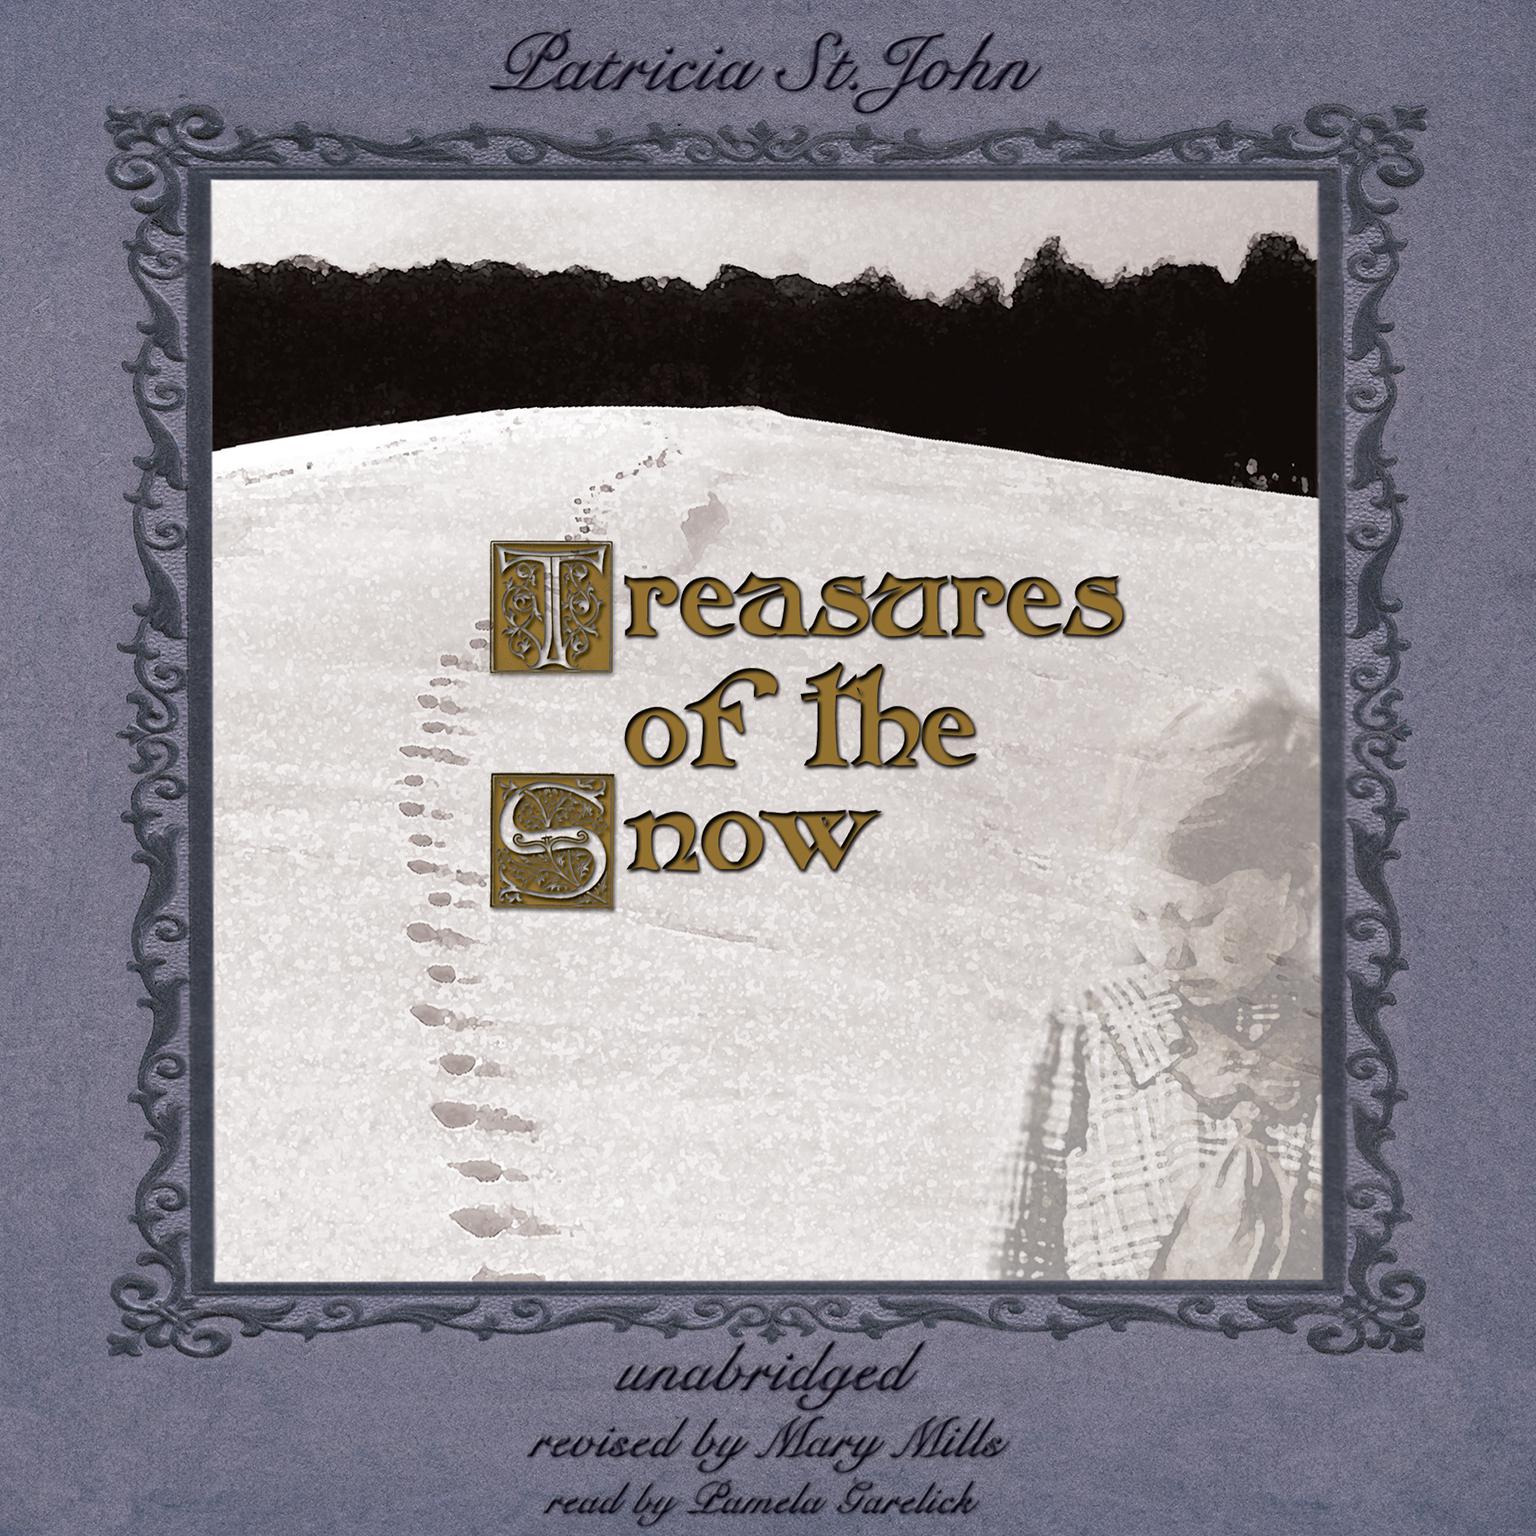 Treasures of the Snow Audiobook, by Patricia Mary St. John